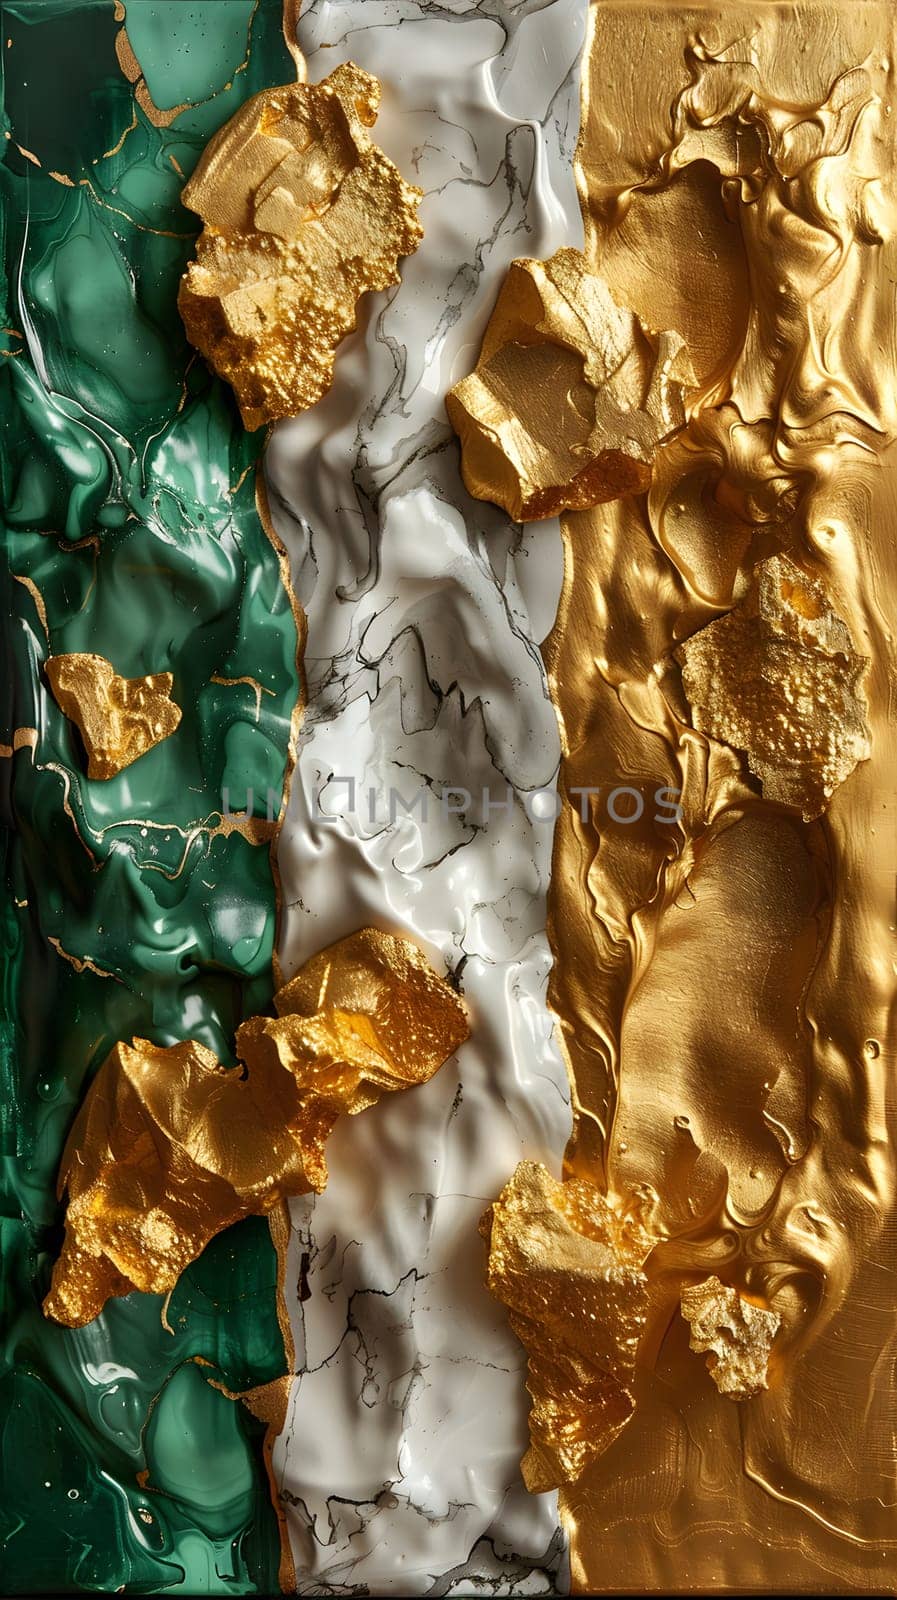 Metallic green, white, and gold patterned fashion accessory by Nadtochiy